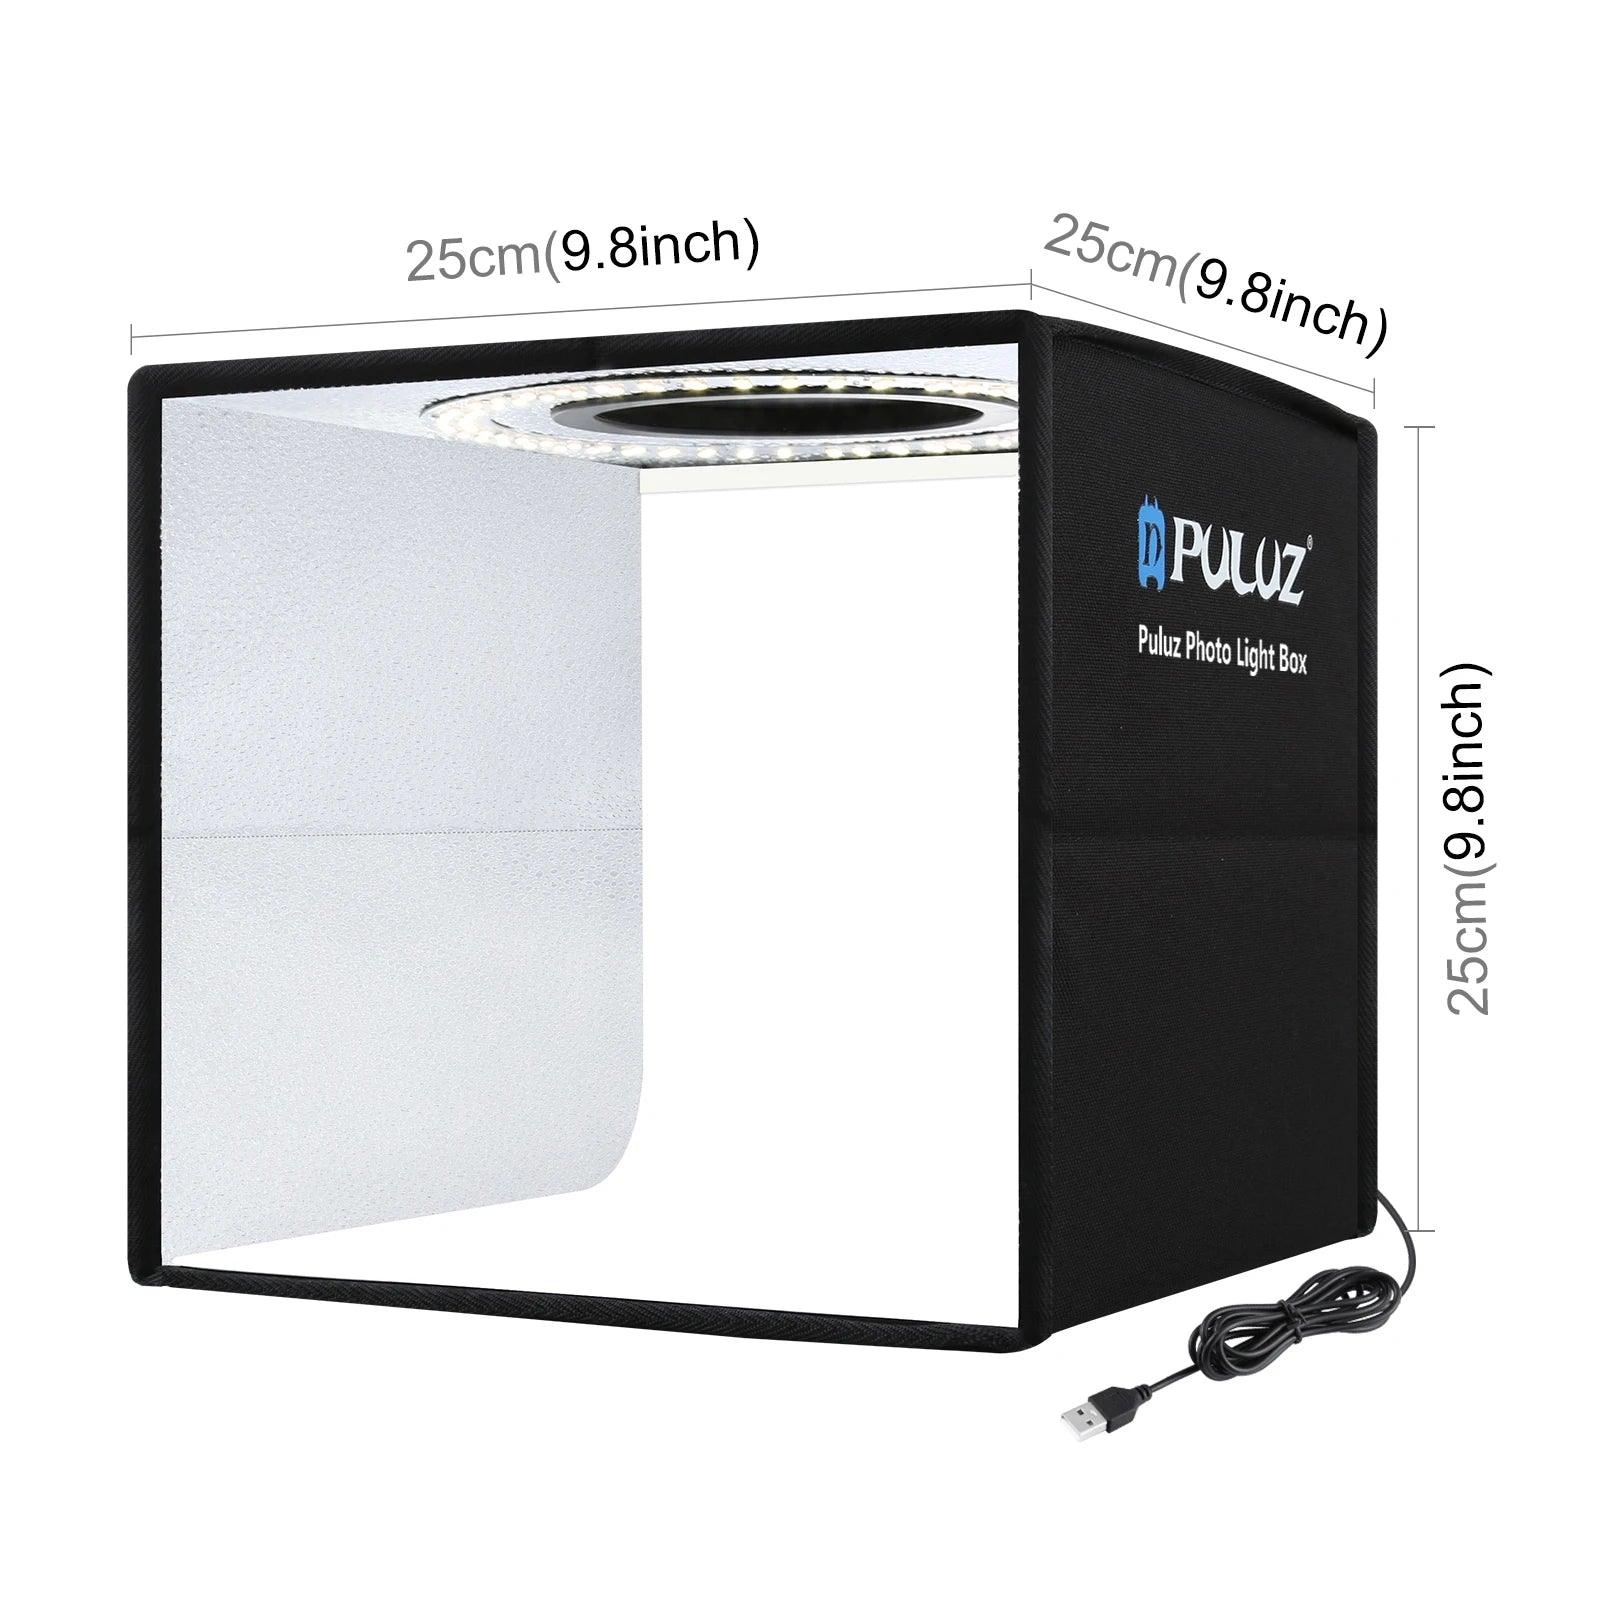 Portable LED Lightbox Studio Kit with 12 Color Backgrounds for Small Item Photography  ourlum.com   